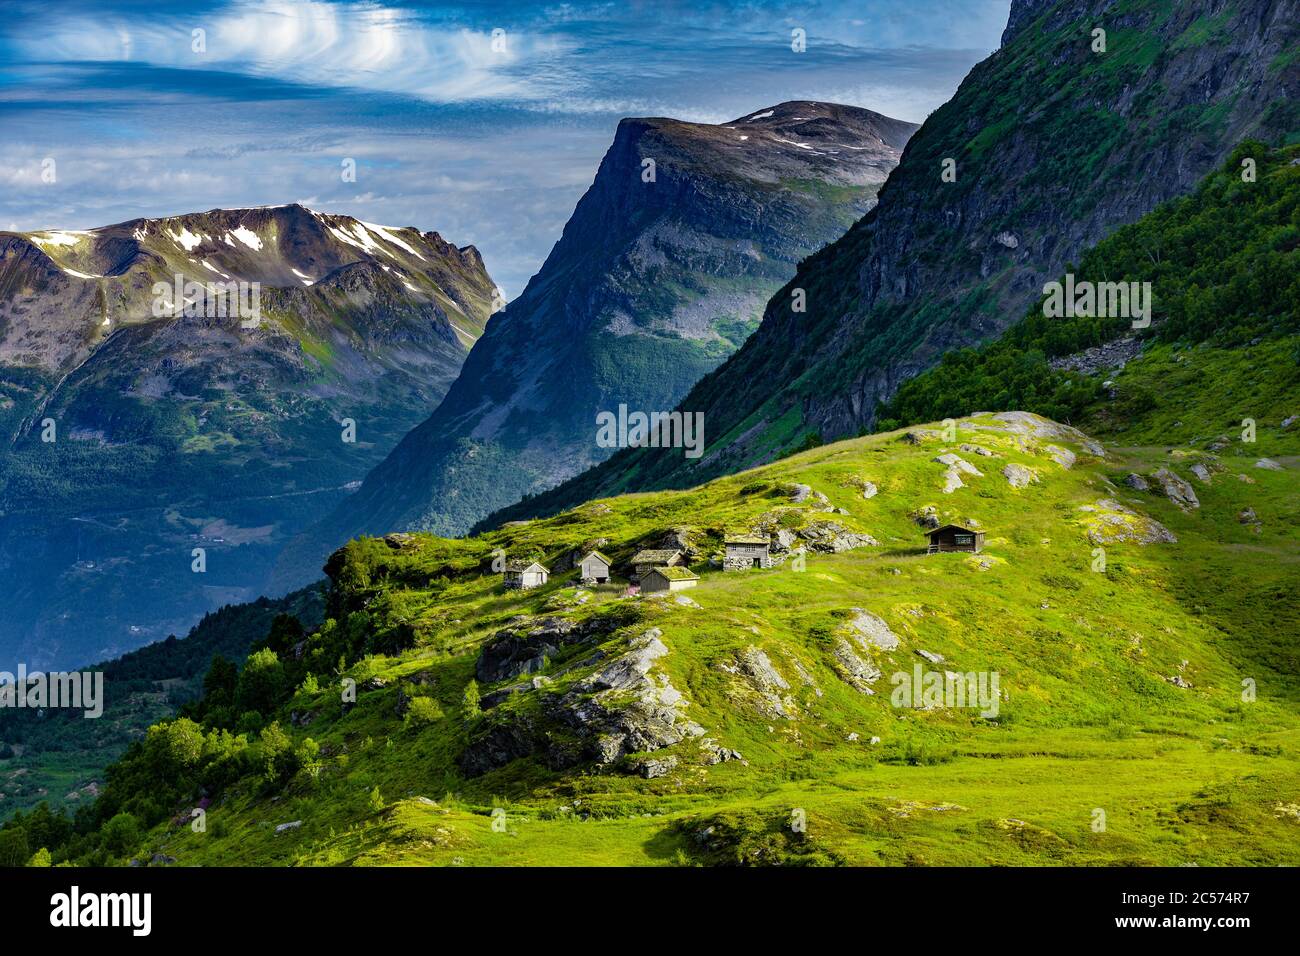 Bergdrorf at Stranda on the Geirangerfjord in Norway Stock Photo